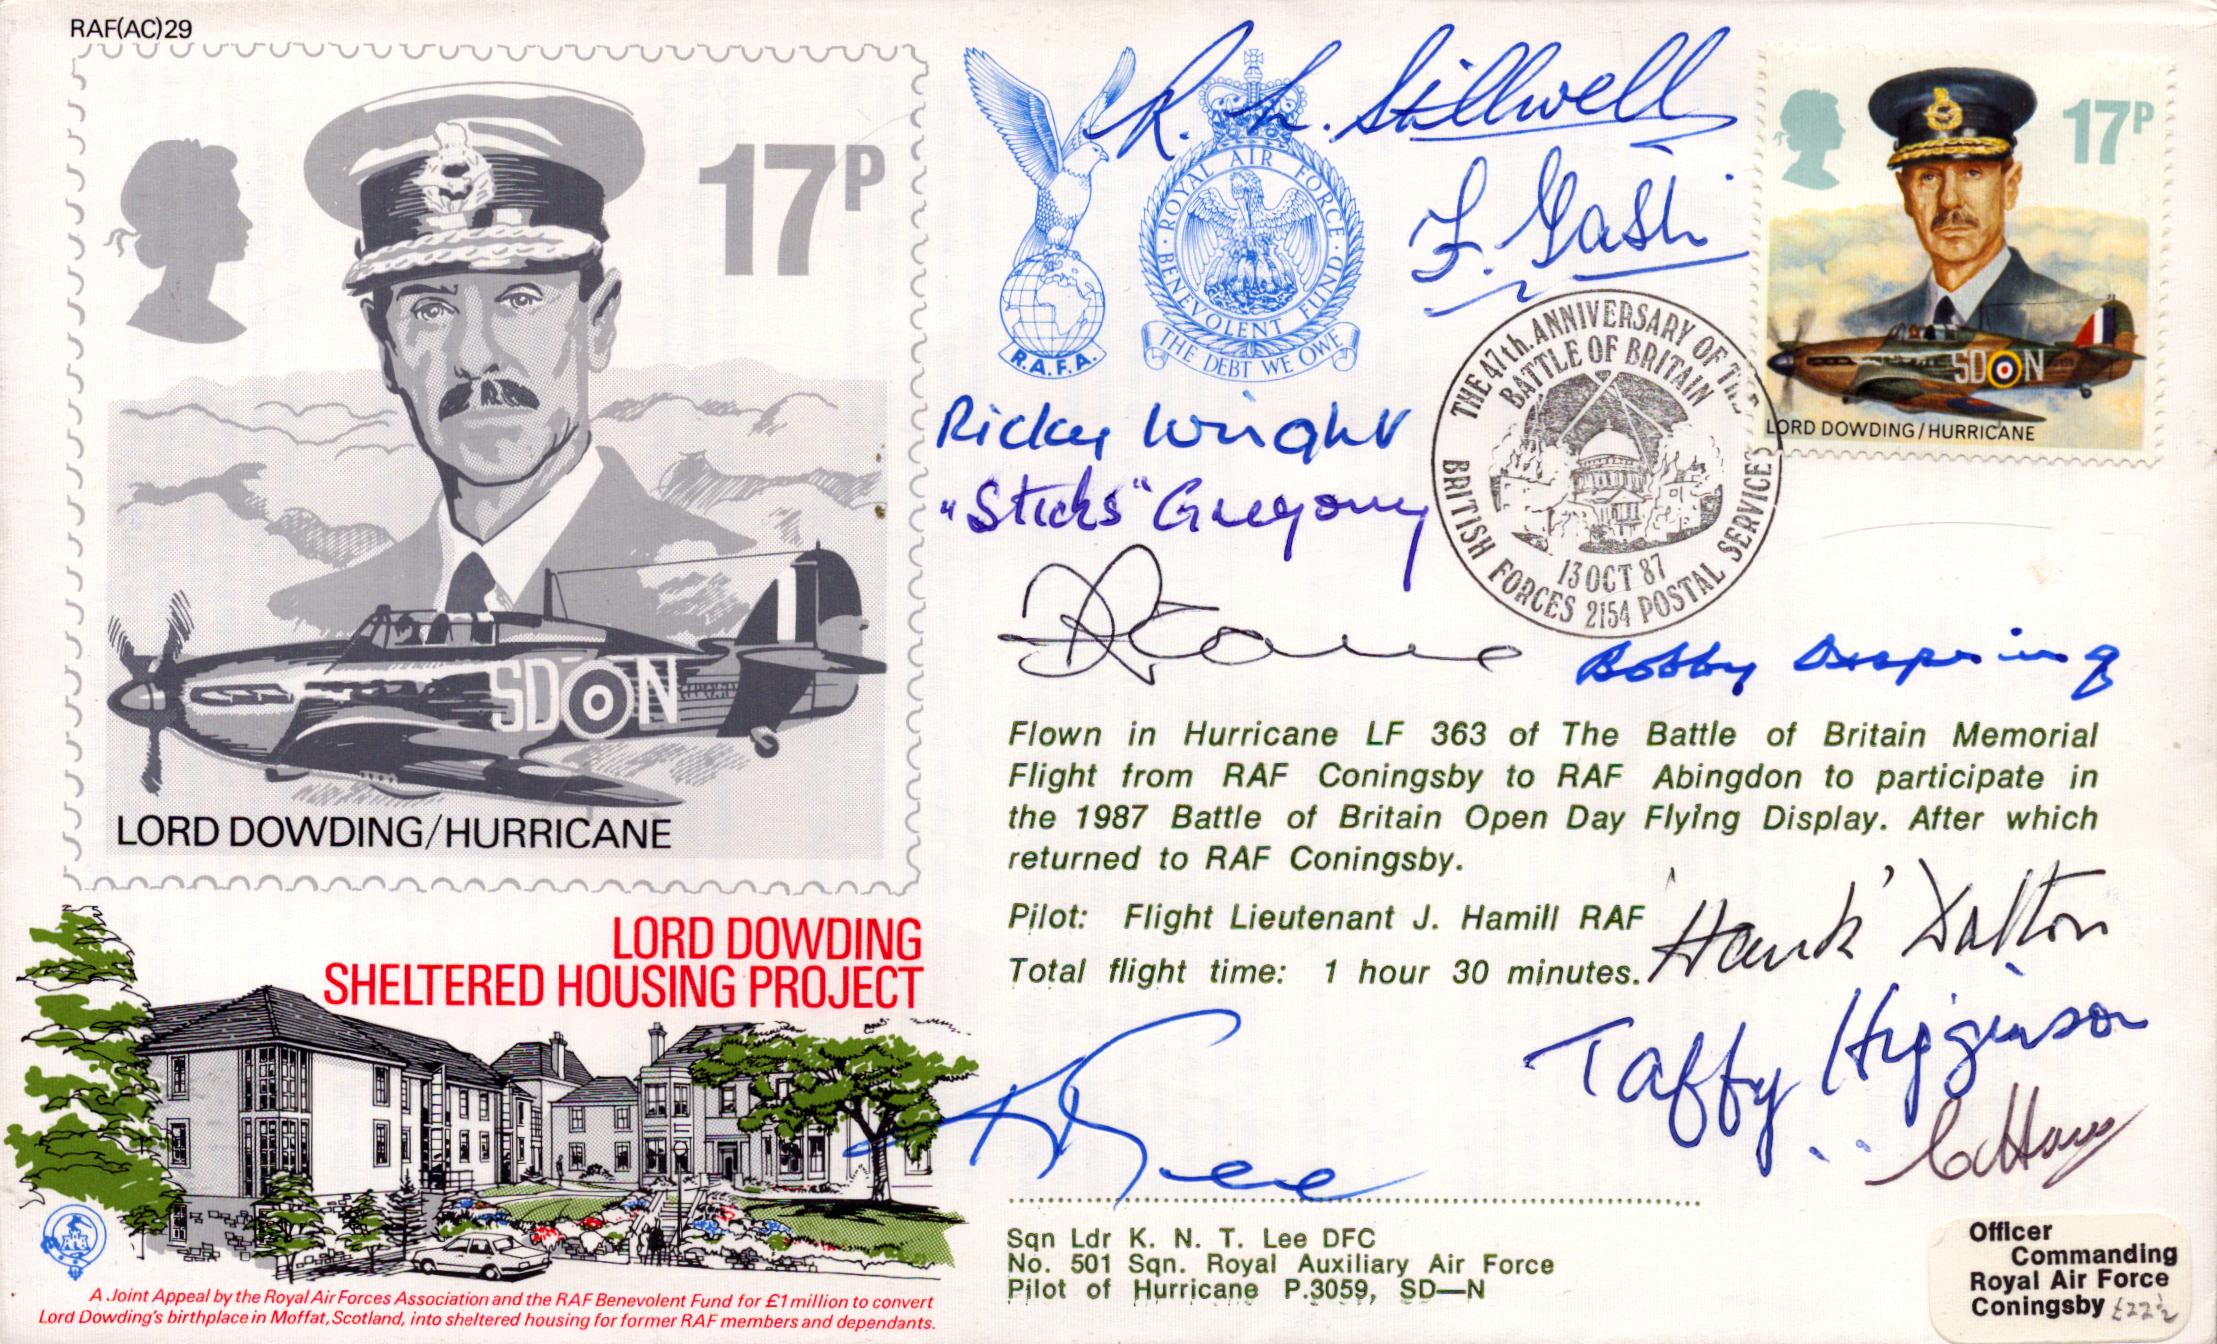 WWII veterans multi signed Lord Dowding/Hurricane Lord Dowding Sheltered Housing Project FDC - Image 3 of 3